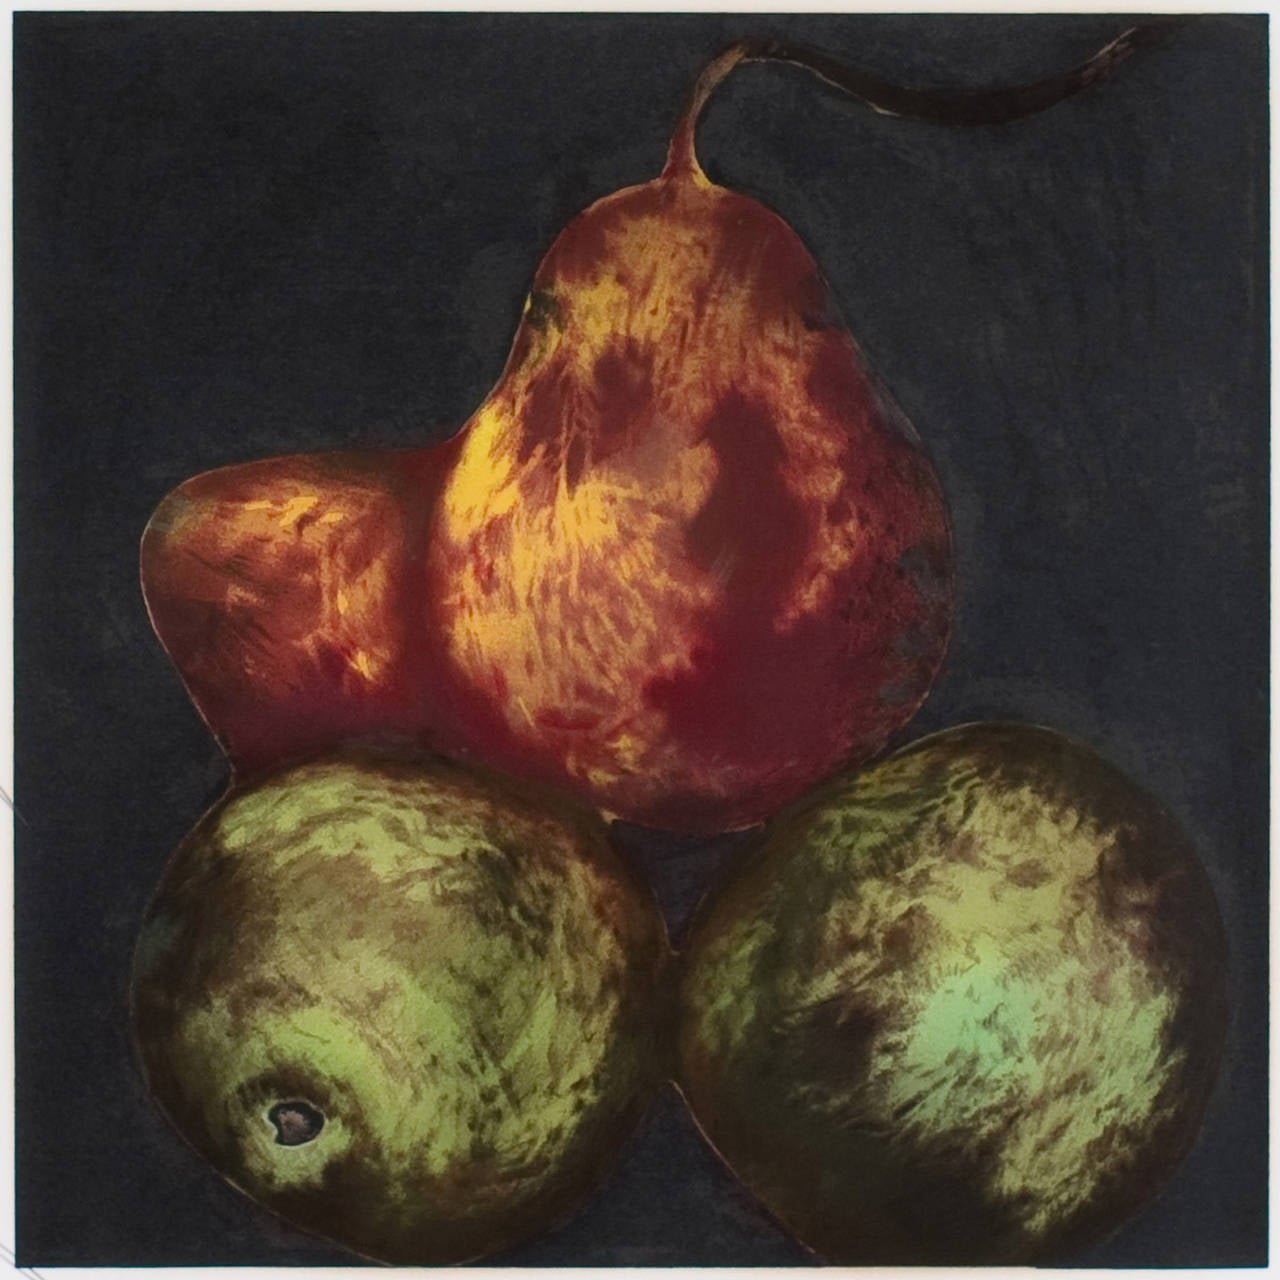 Donald Sultan Still-Life Print - Red Pear, ed 54/125 from "Fruits and Flowers"